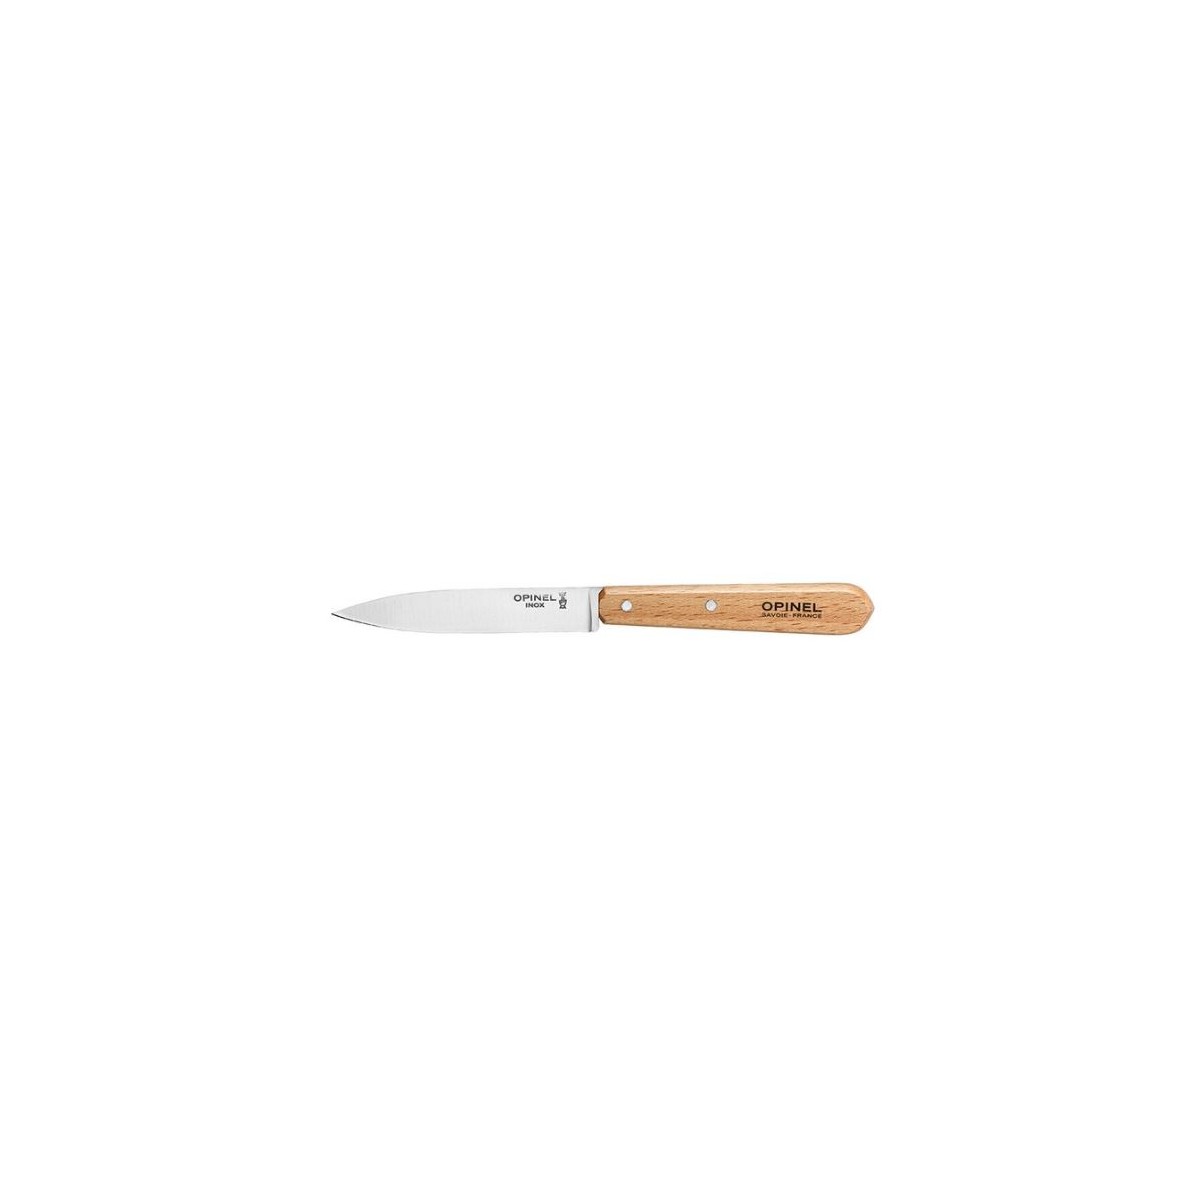 OPINEL OFFICE KNIFE N°112 STAINLESS STEEL/WOOD 2PC